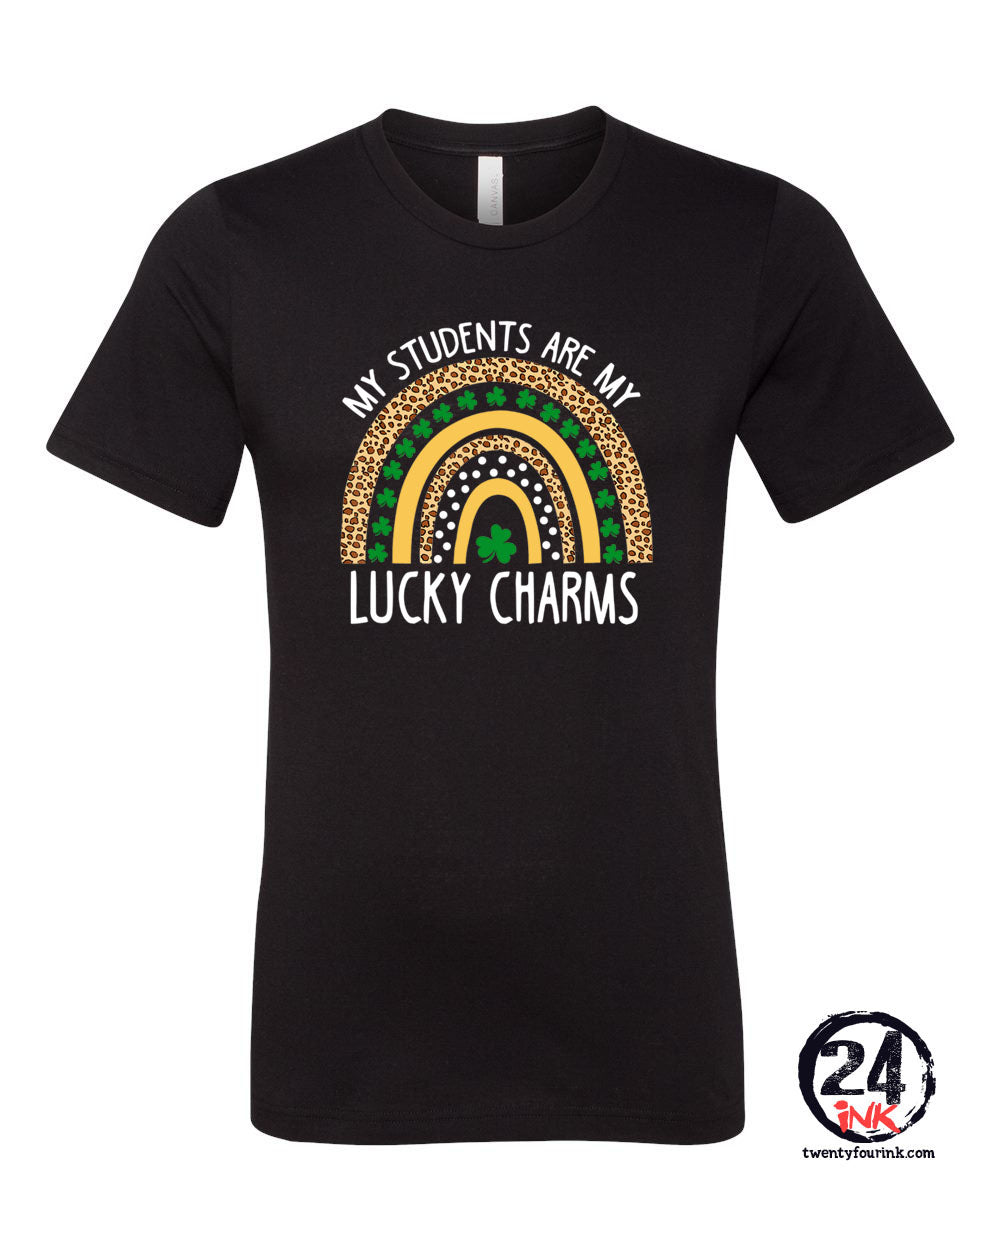 My students are my lucky charms Rainbow T-Shirt